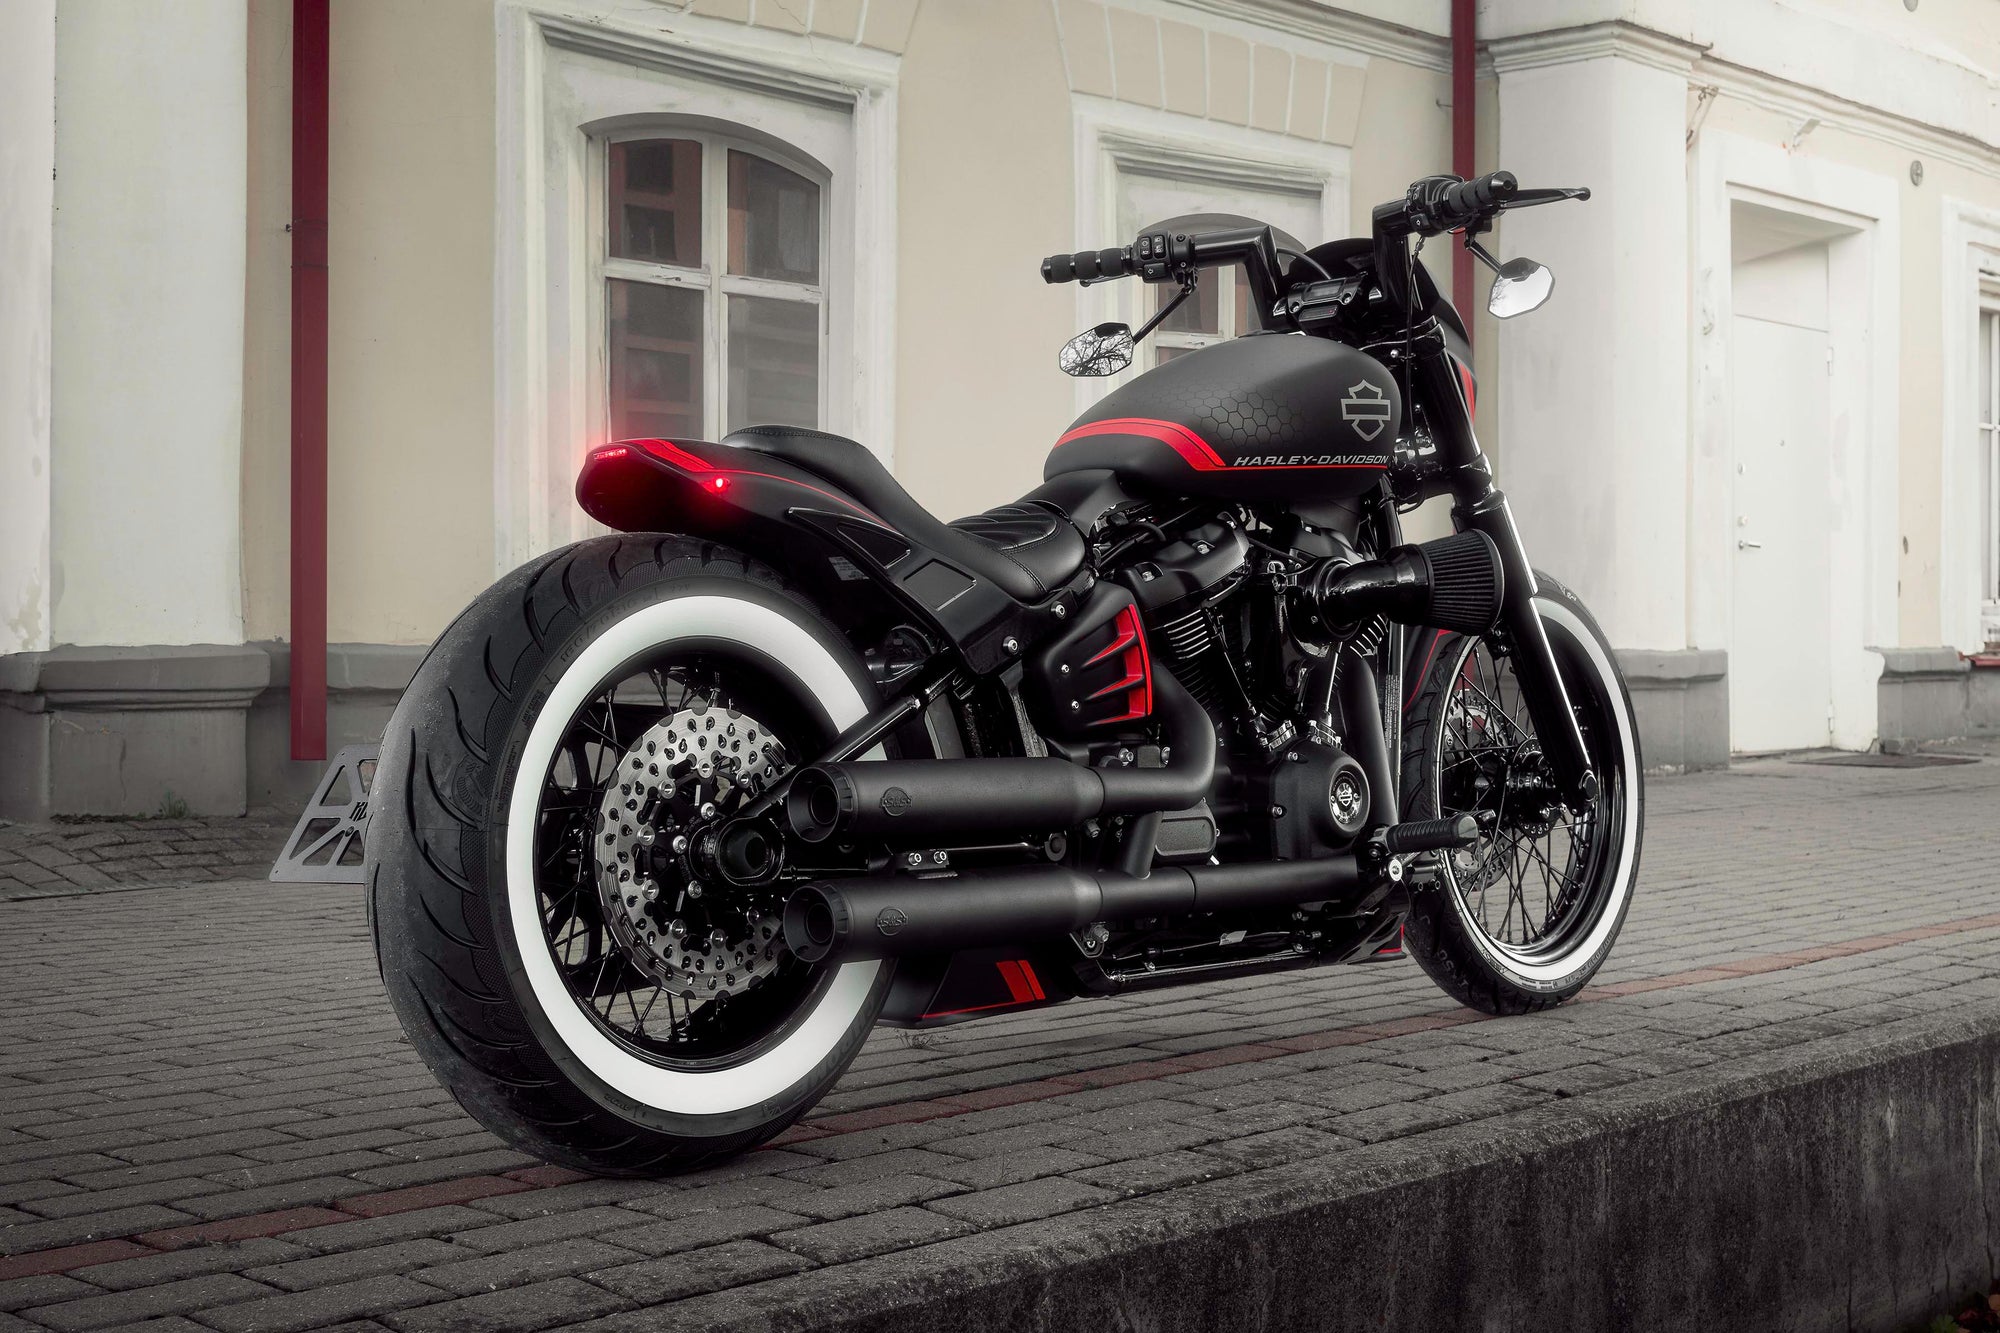 Modified Harley Davidson Street Bob motorcycle with Killer Custom parts from side at a railway station